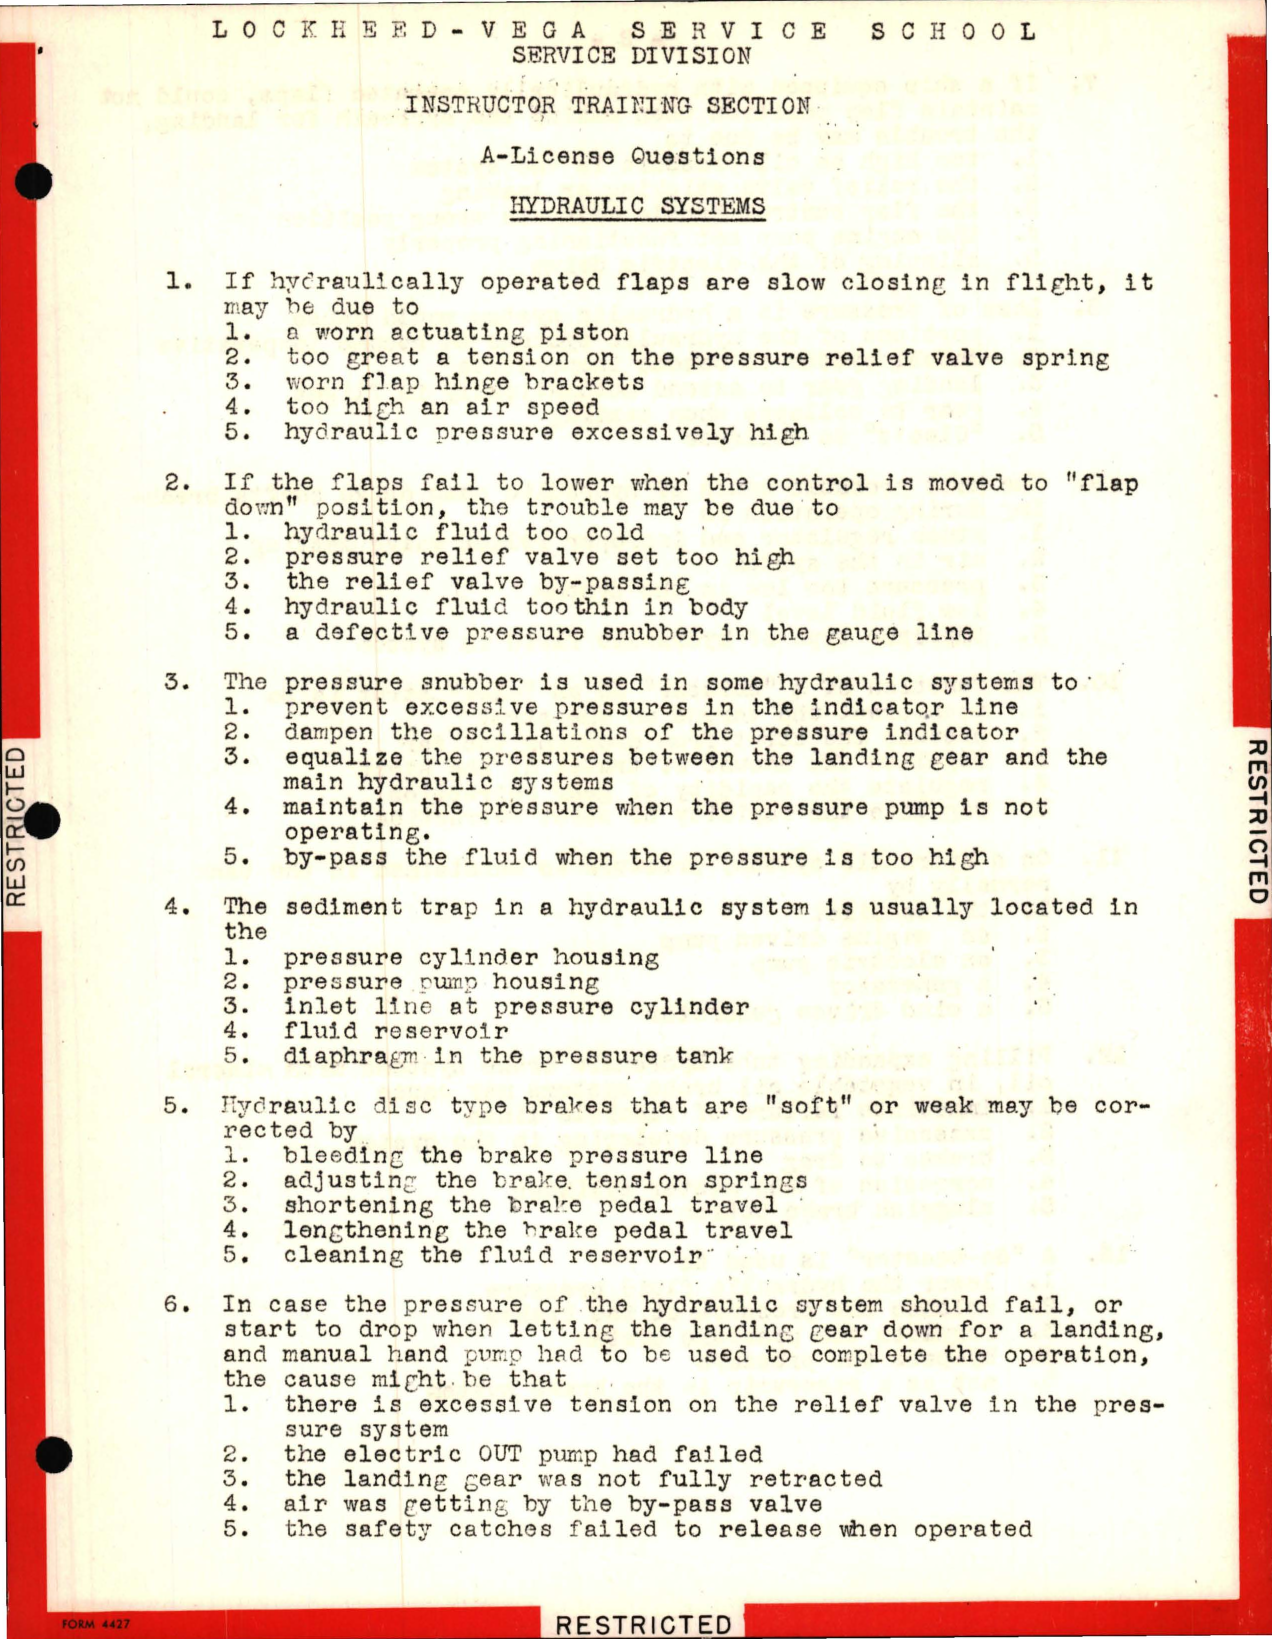 Sample page 1 from AirCorps Library document: Instructor Training Questions for Hydraulic Systems - Lockheed-Vega Service School